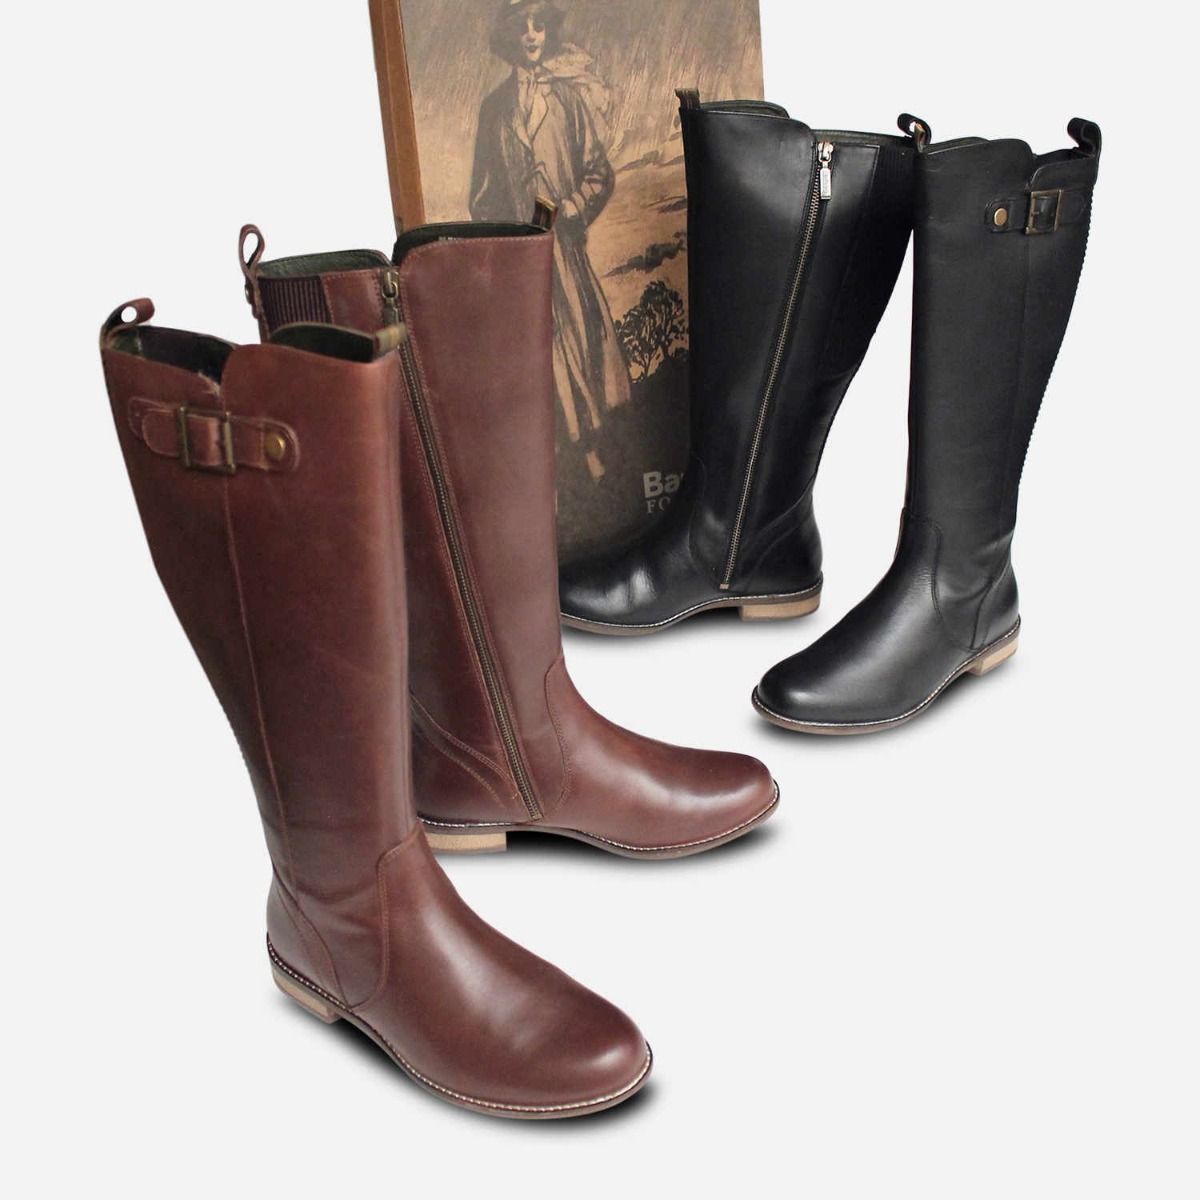 barbour knee high boots